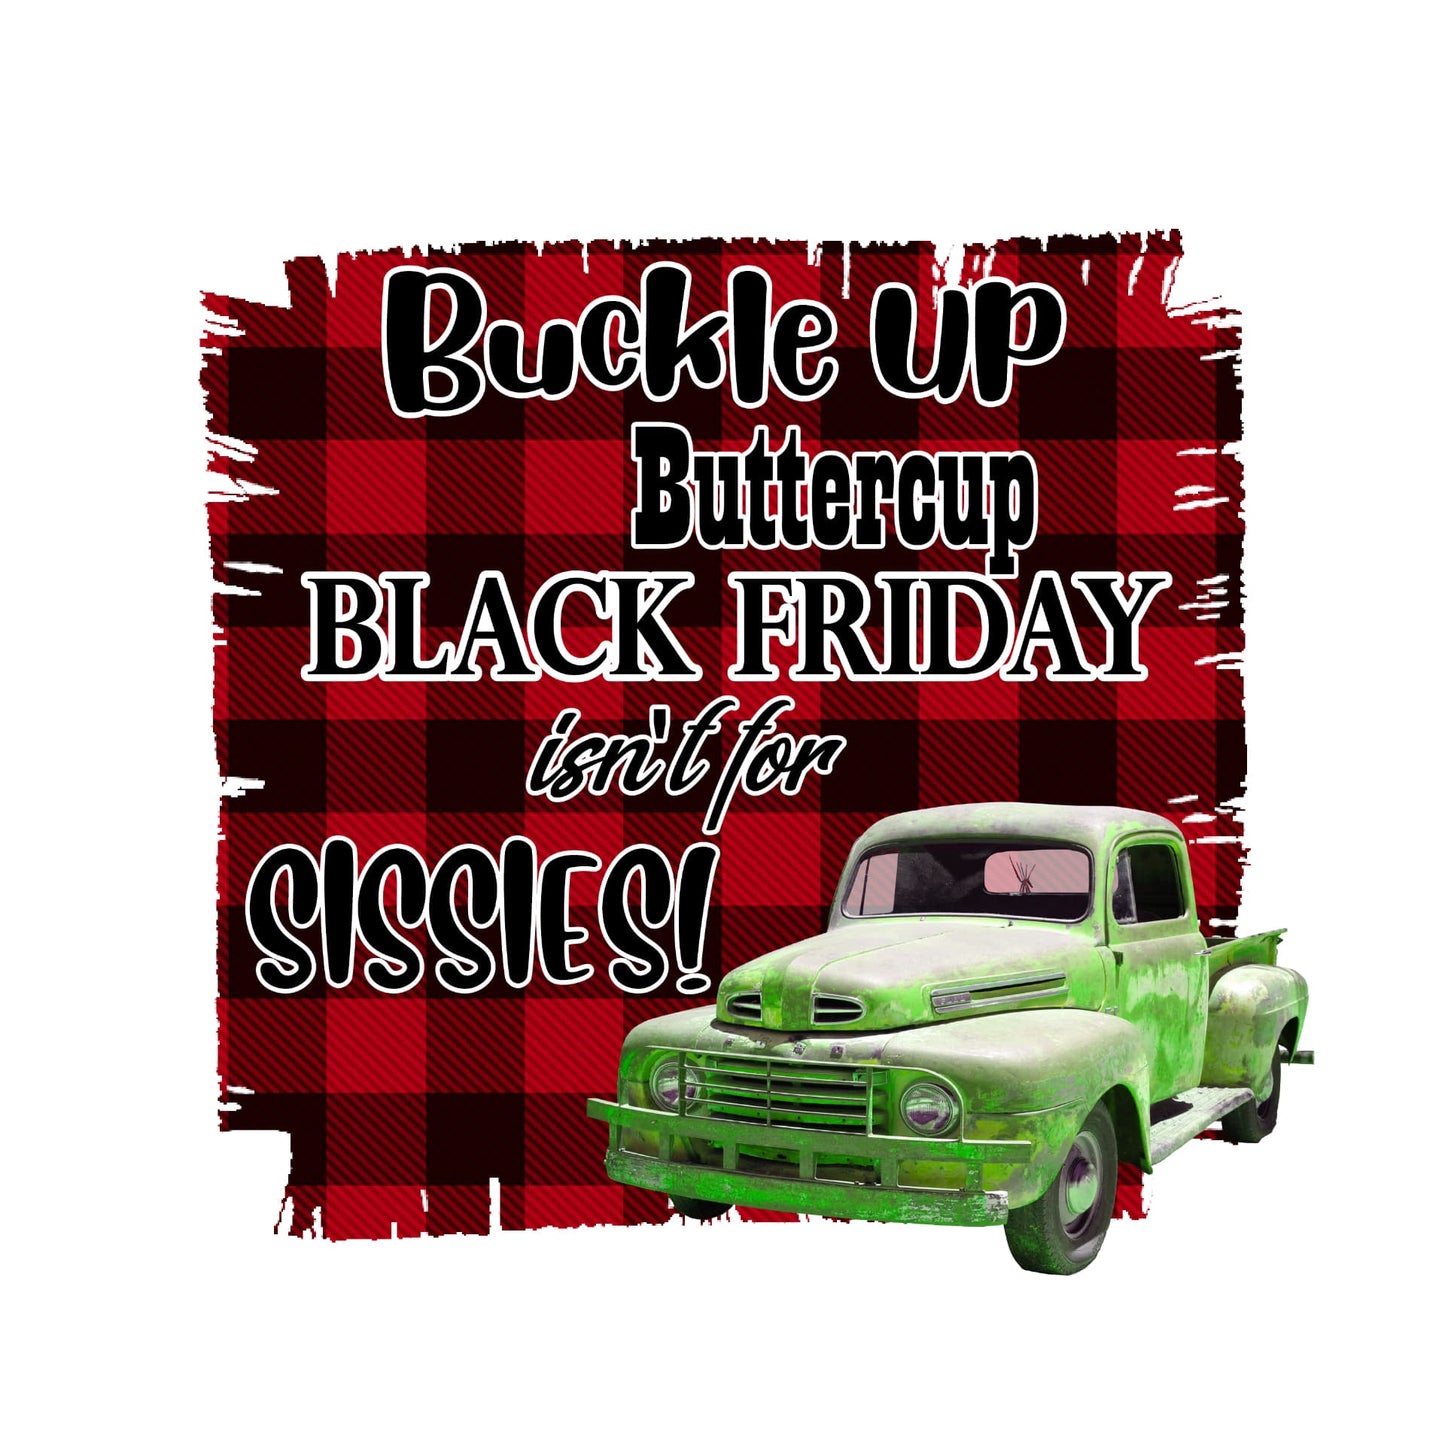 Buckle Up Buttercup Black Friday Isn't For Sissies- Sublimation